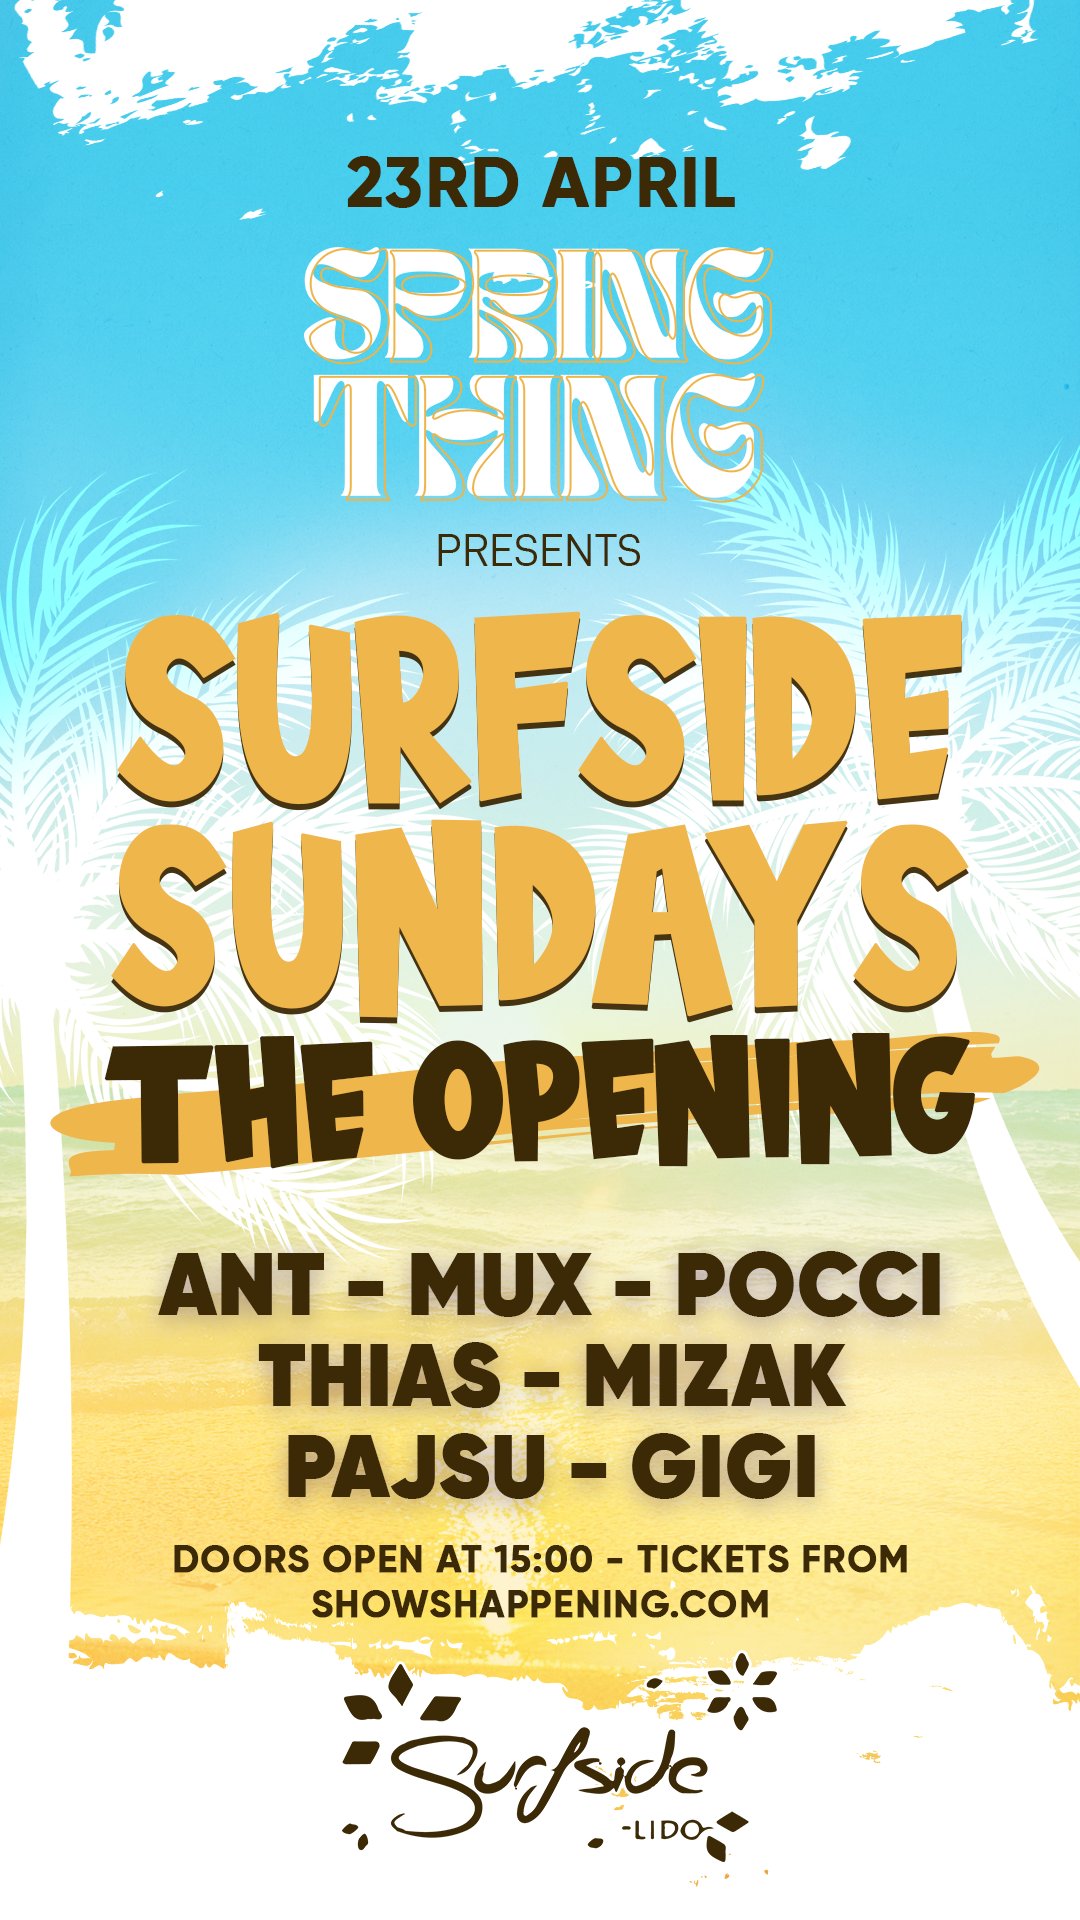 SPRING THING | Surfside Sundays (The Opening) poster